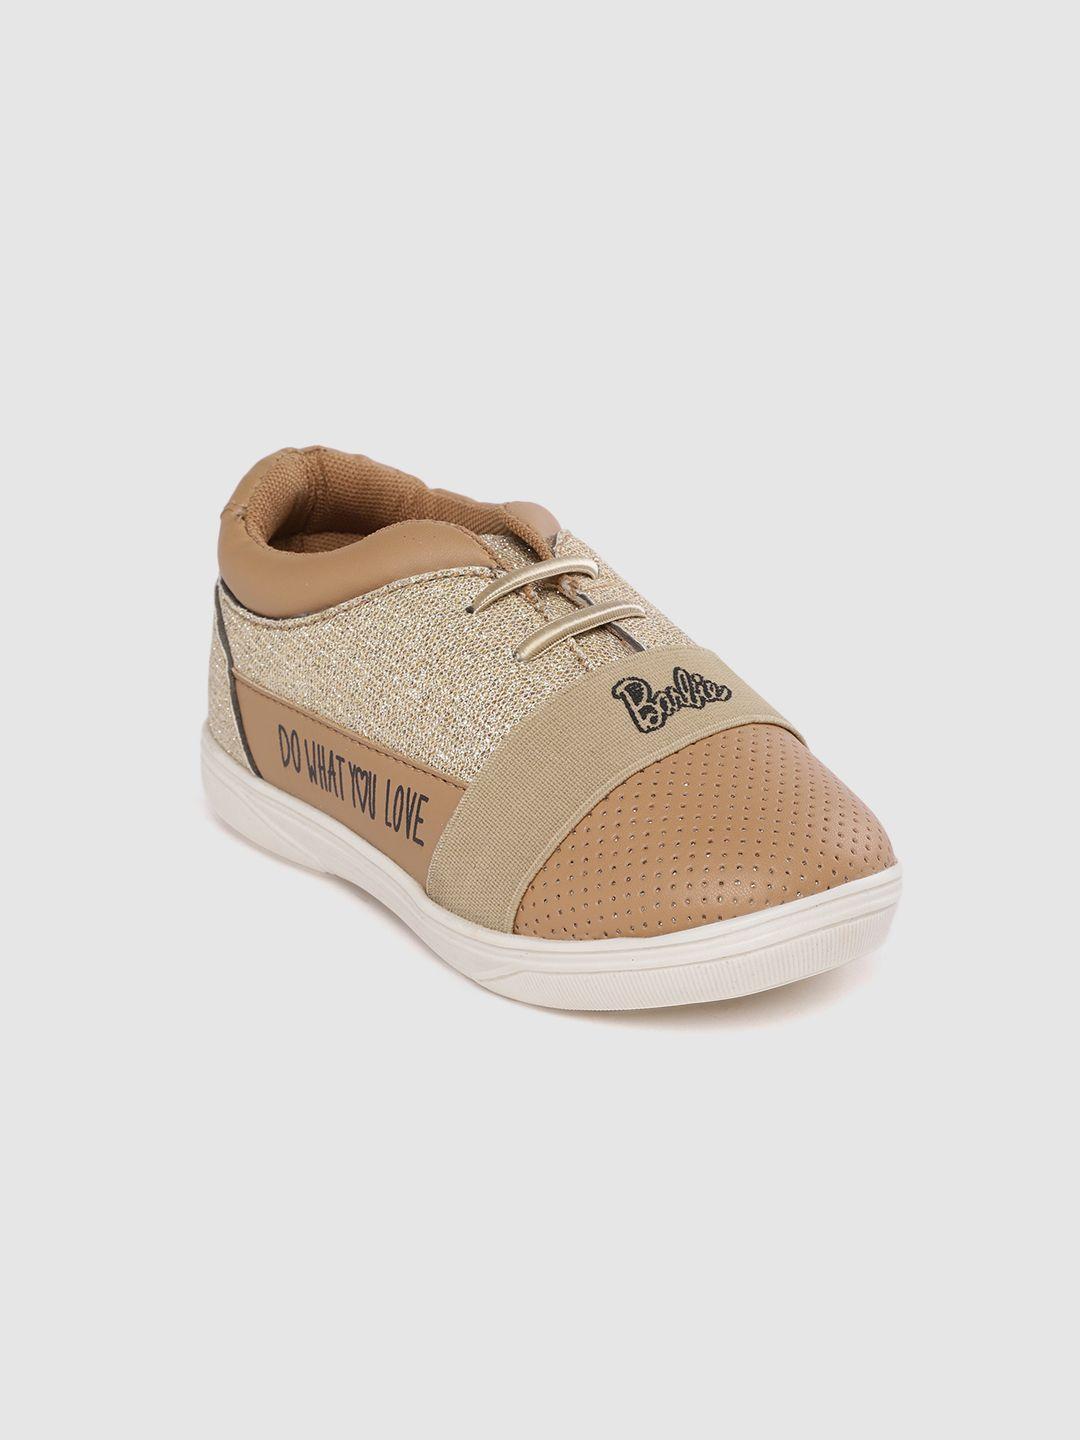 toothless girls gold-toned & beige colourblocked slip-on sneakers with barbie print detail